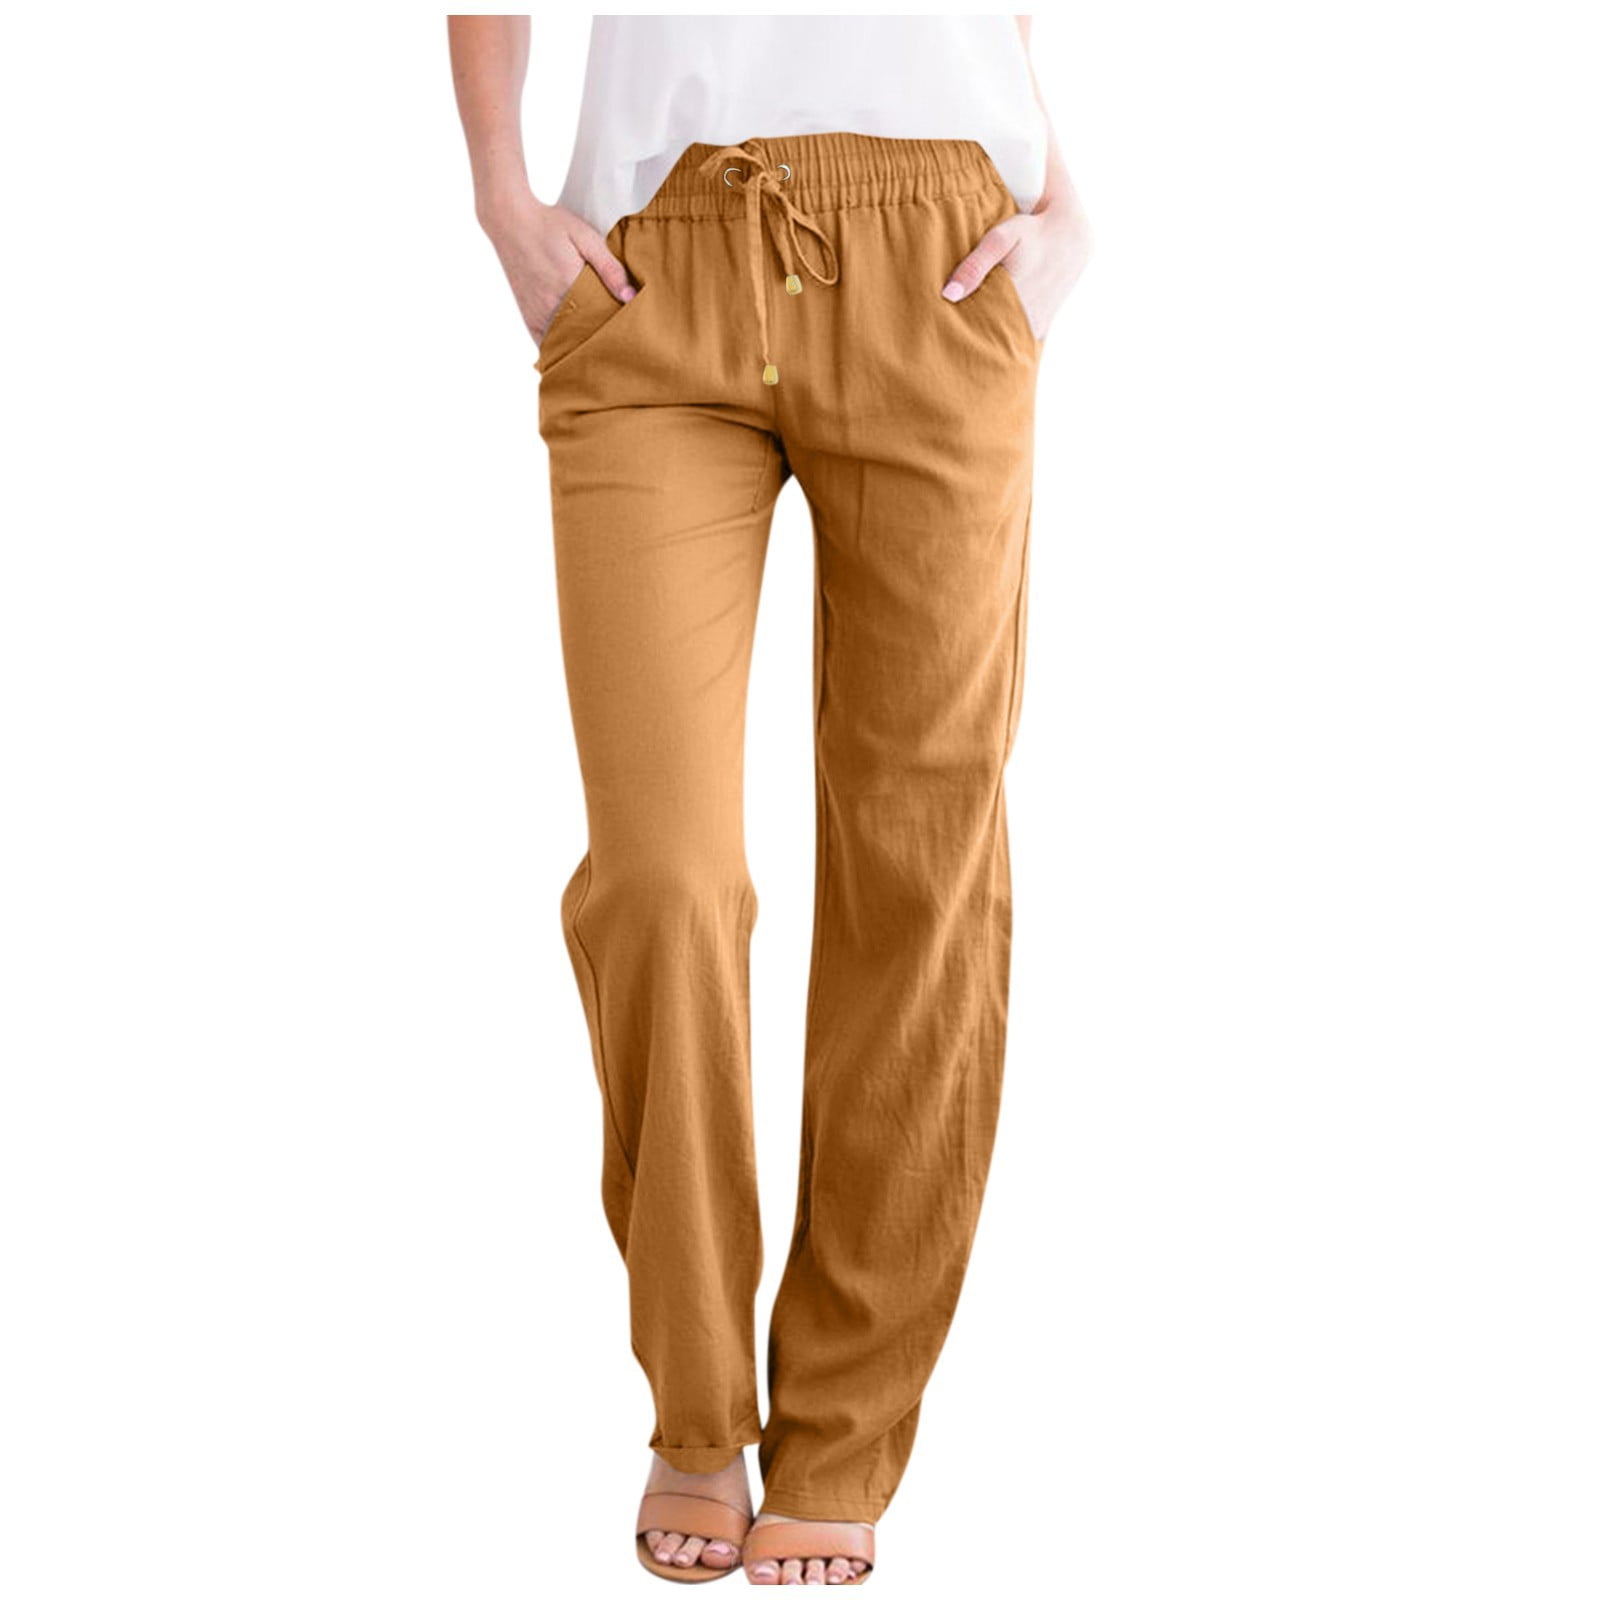 Holiday Savings! Cameland Women's Solid Color Drawstring High Waist Pocket  Loose Large Size Cotton Casual Pants 